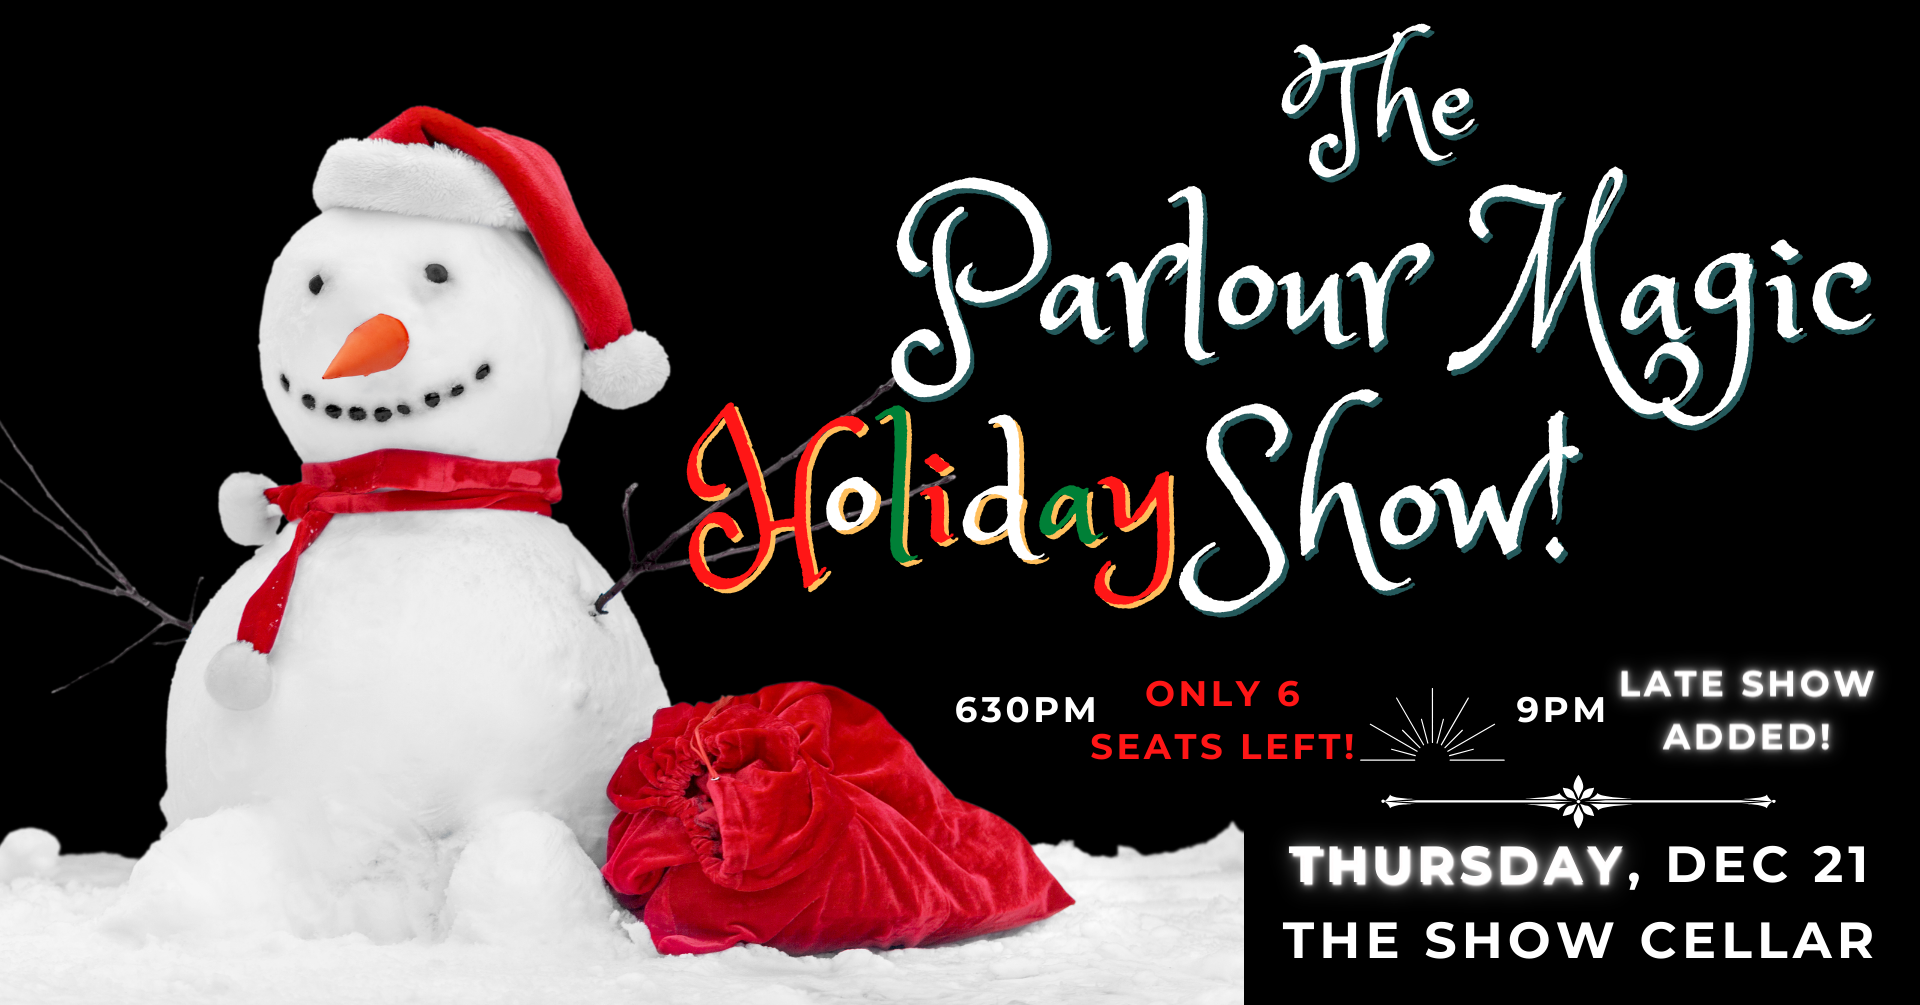 The Parlour Magic Holiday Show!